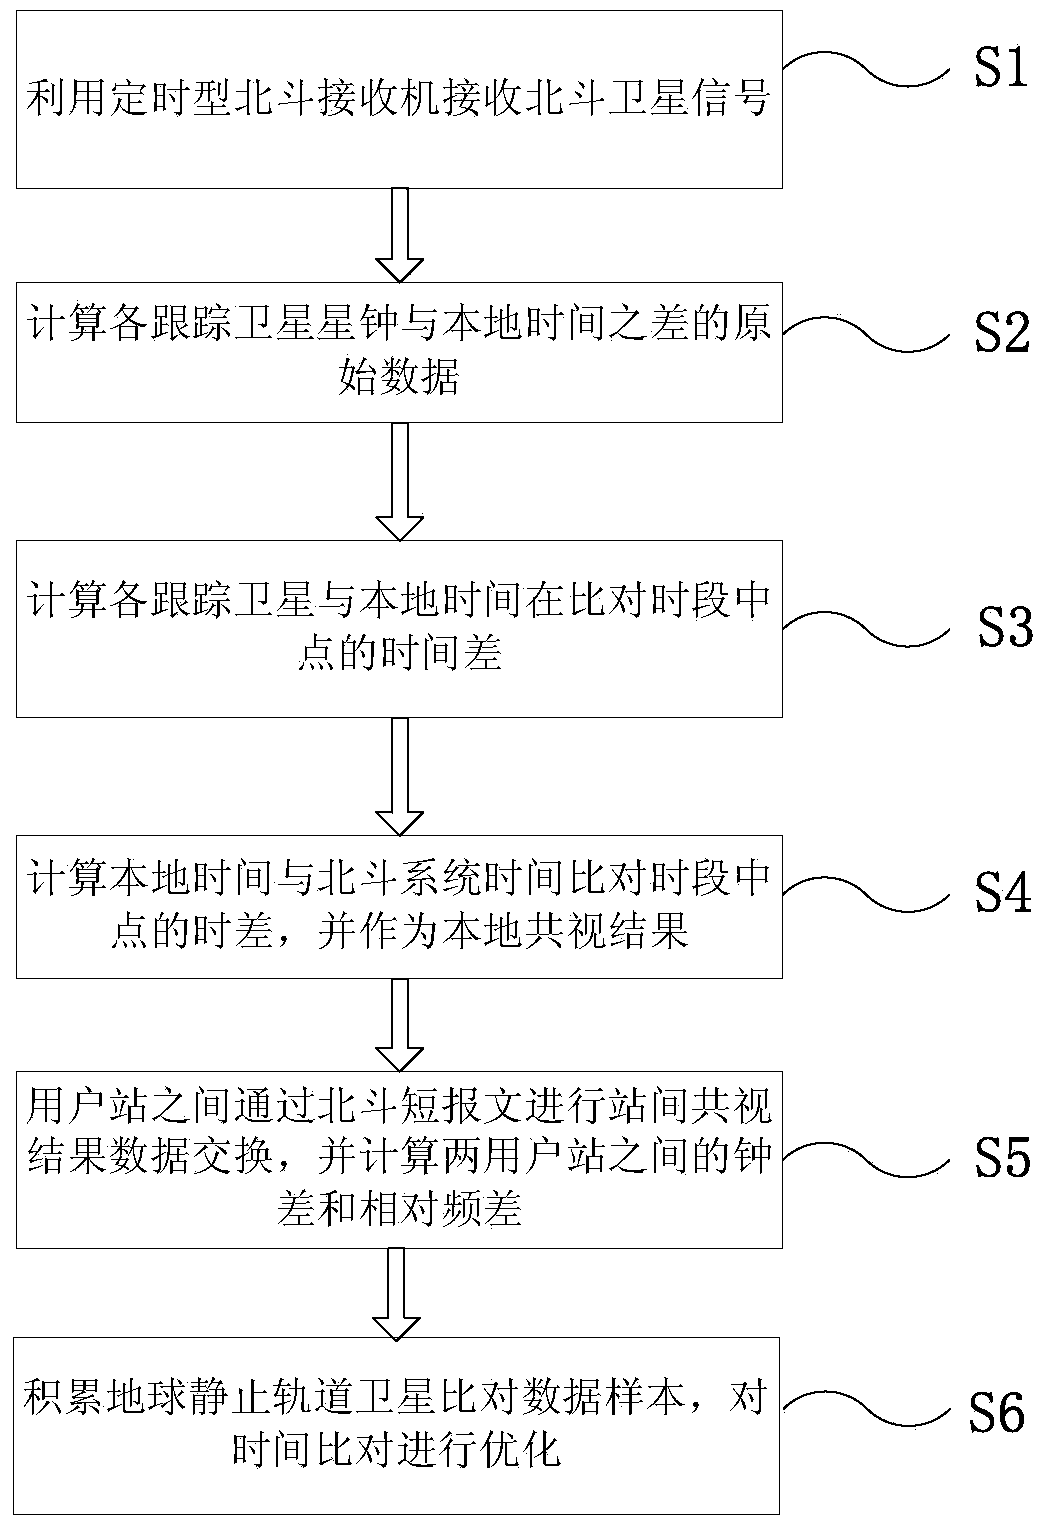 Common view time and frequency transmitting method based on BeiDou navigation satellite system